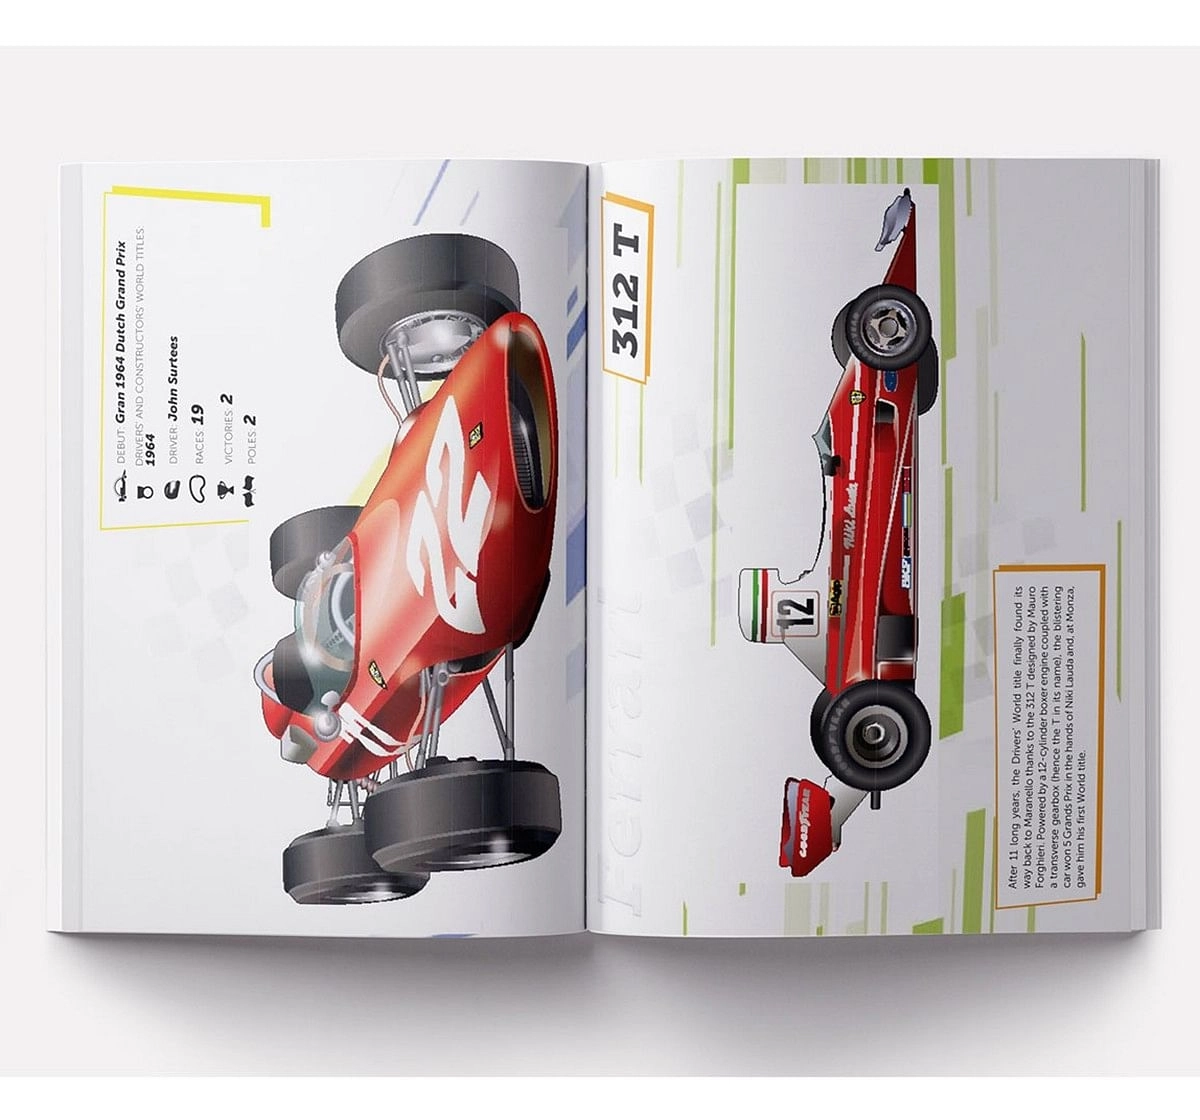 Ferrari Sticker Book For Kids: The Most Powerful Street Cars, 44 Pages Book By Franco Cosimo Panini, Paperback